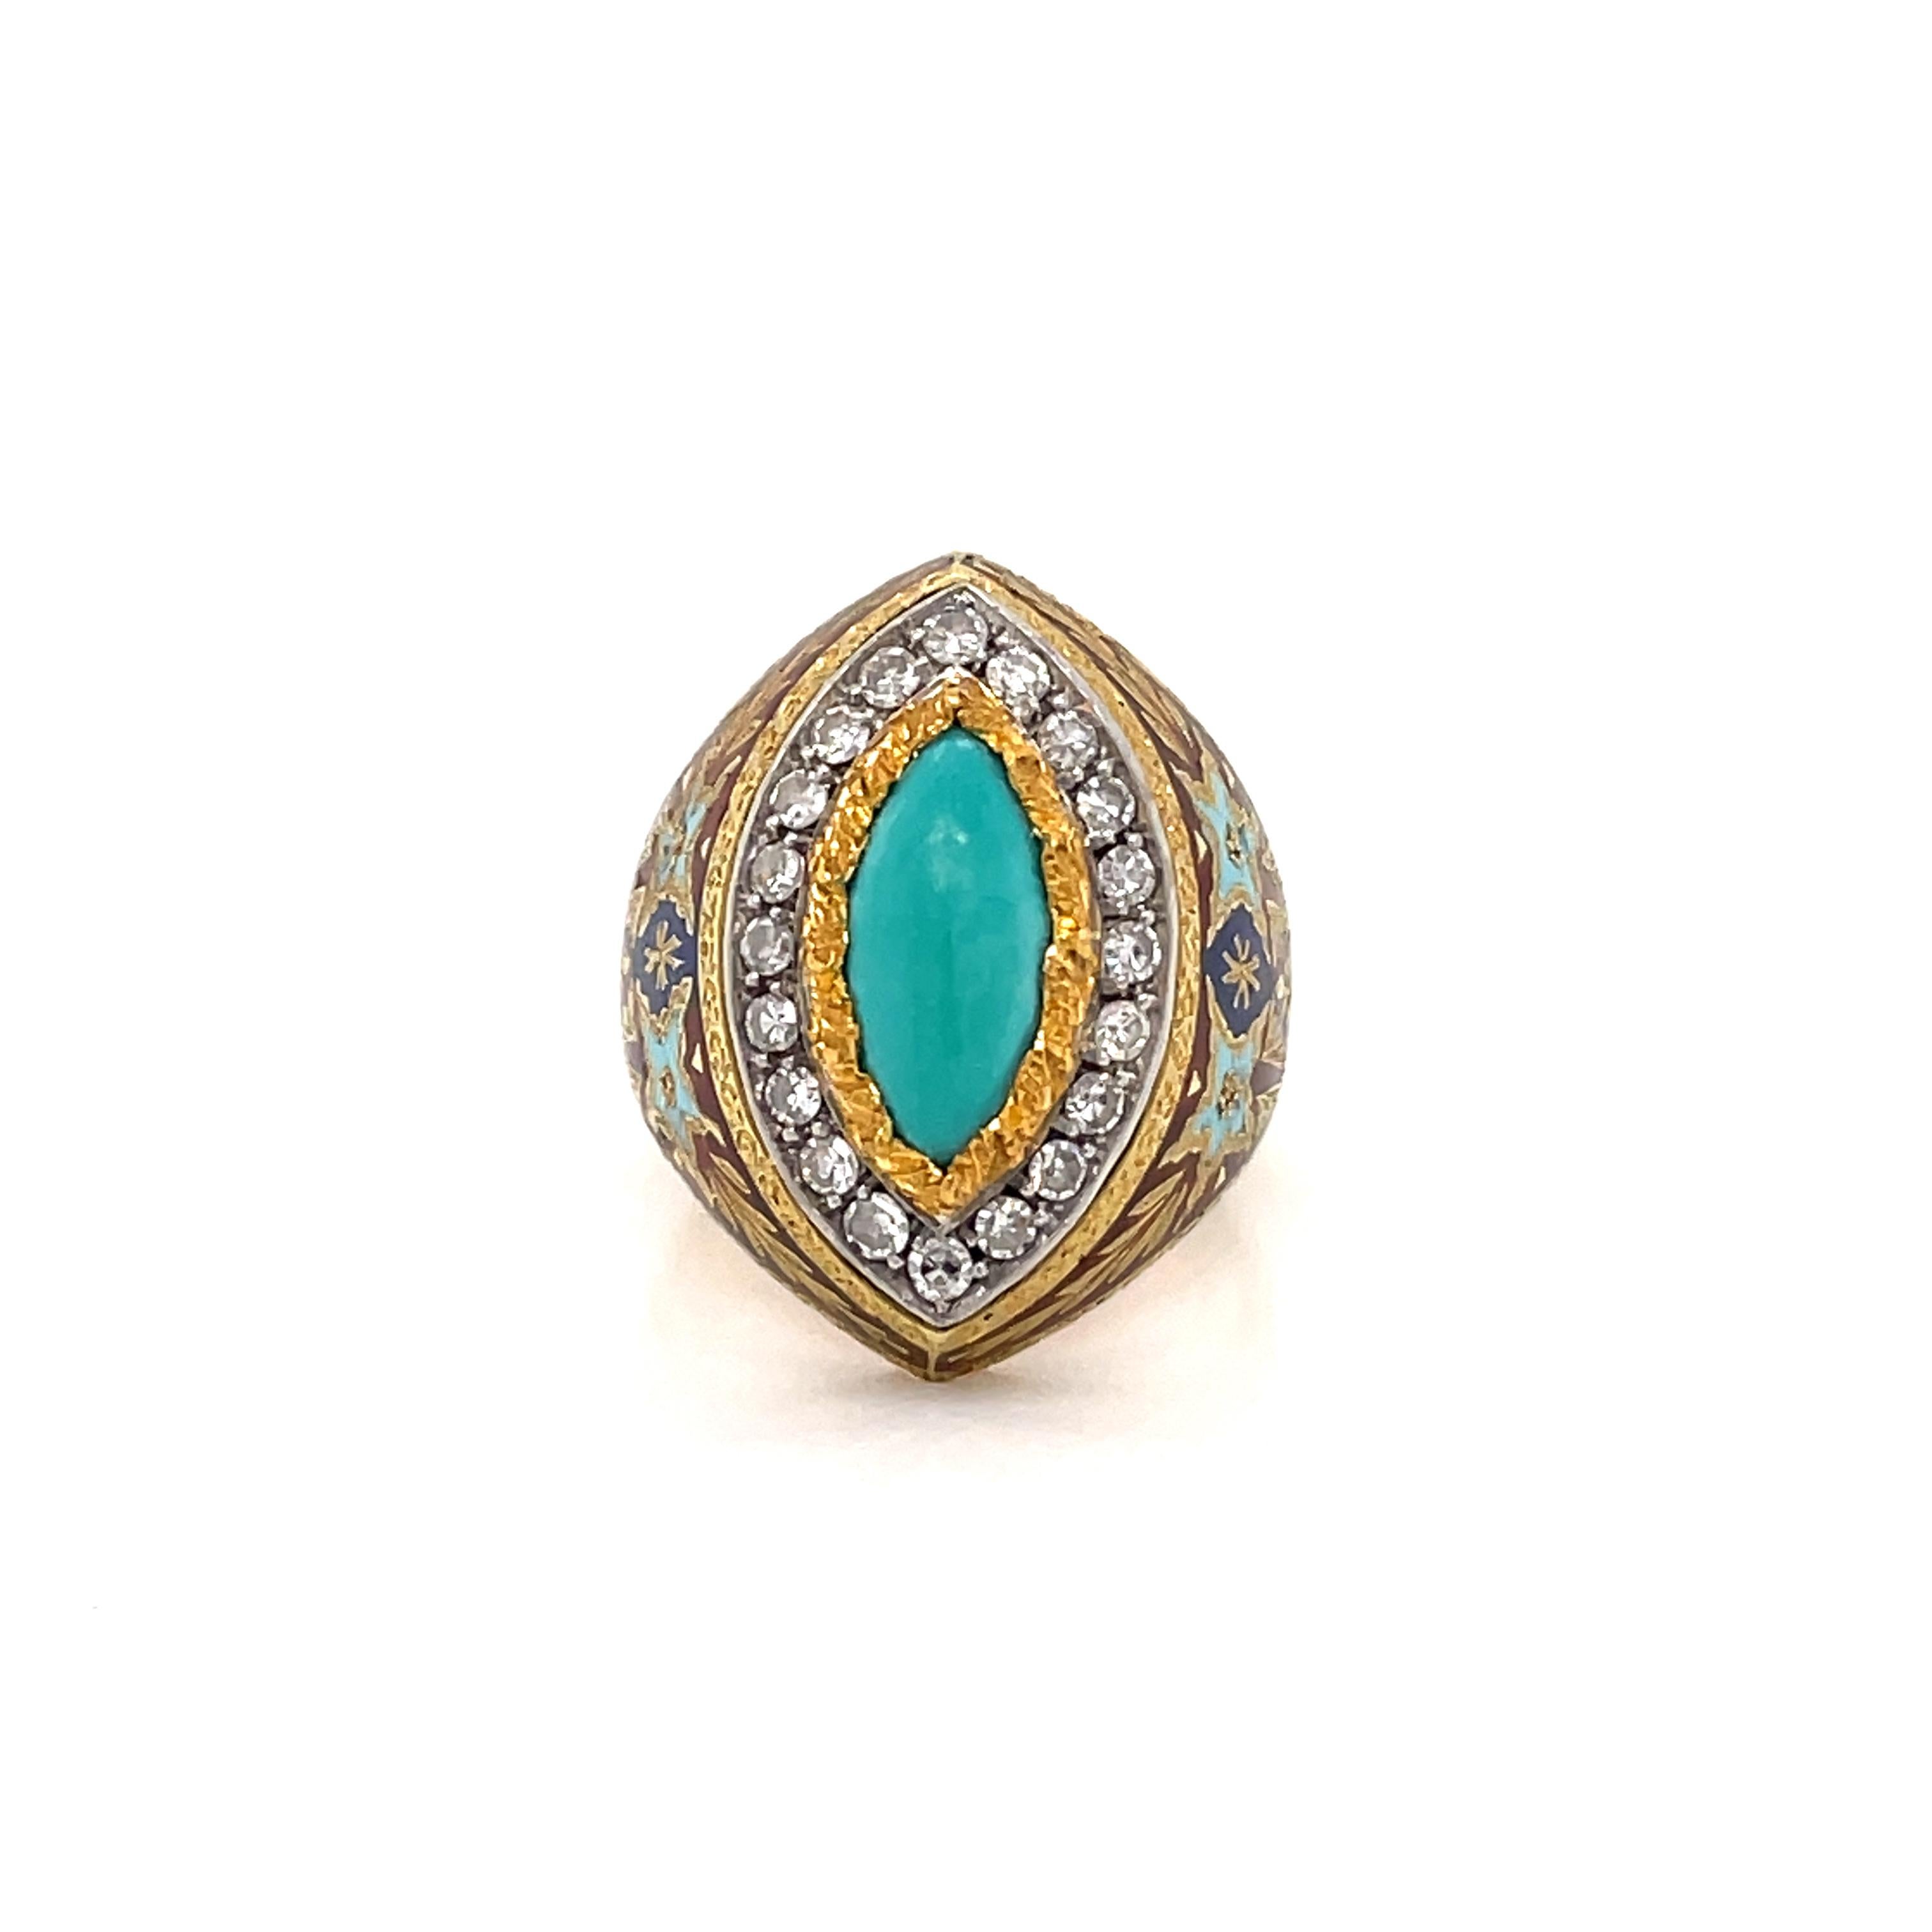 An iconic 18kt yellow gold ring by Roman master Cazzaniga, decorated with fine enamels, it features a natural turquoise with an halo of round brilliant cut diamonds. Made in Italy, circa 1970.
The ring measures a size 5.5, no sizable.
Hallmarks: